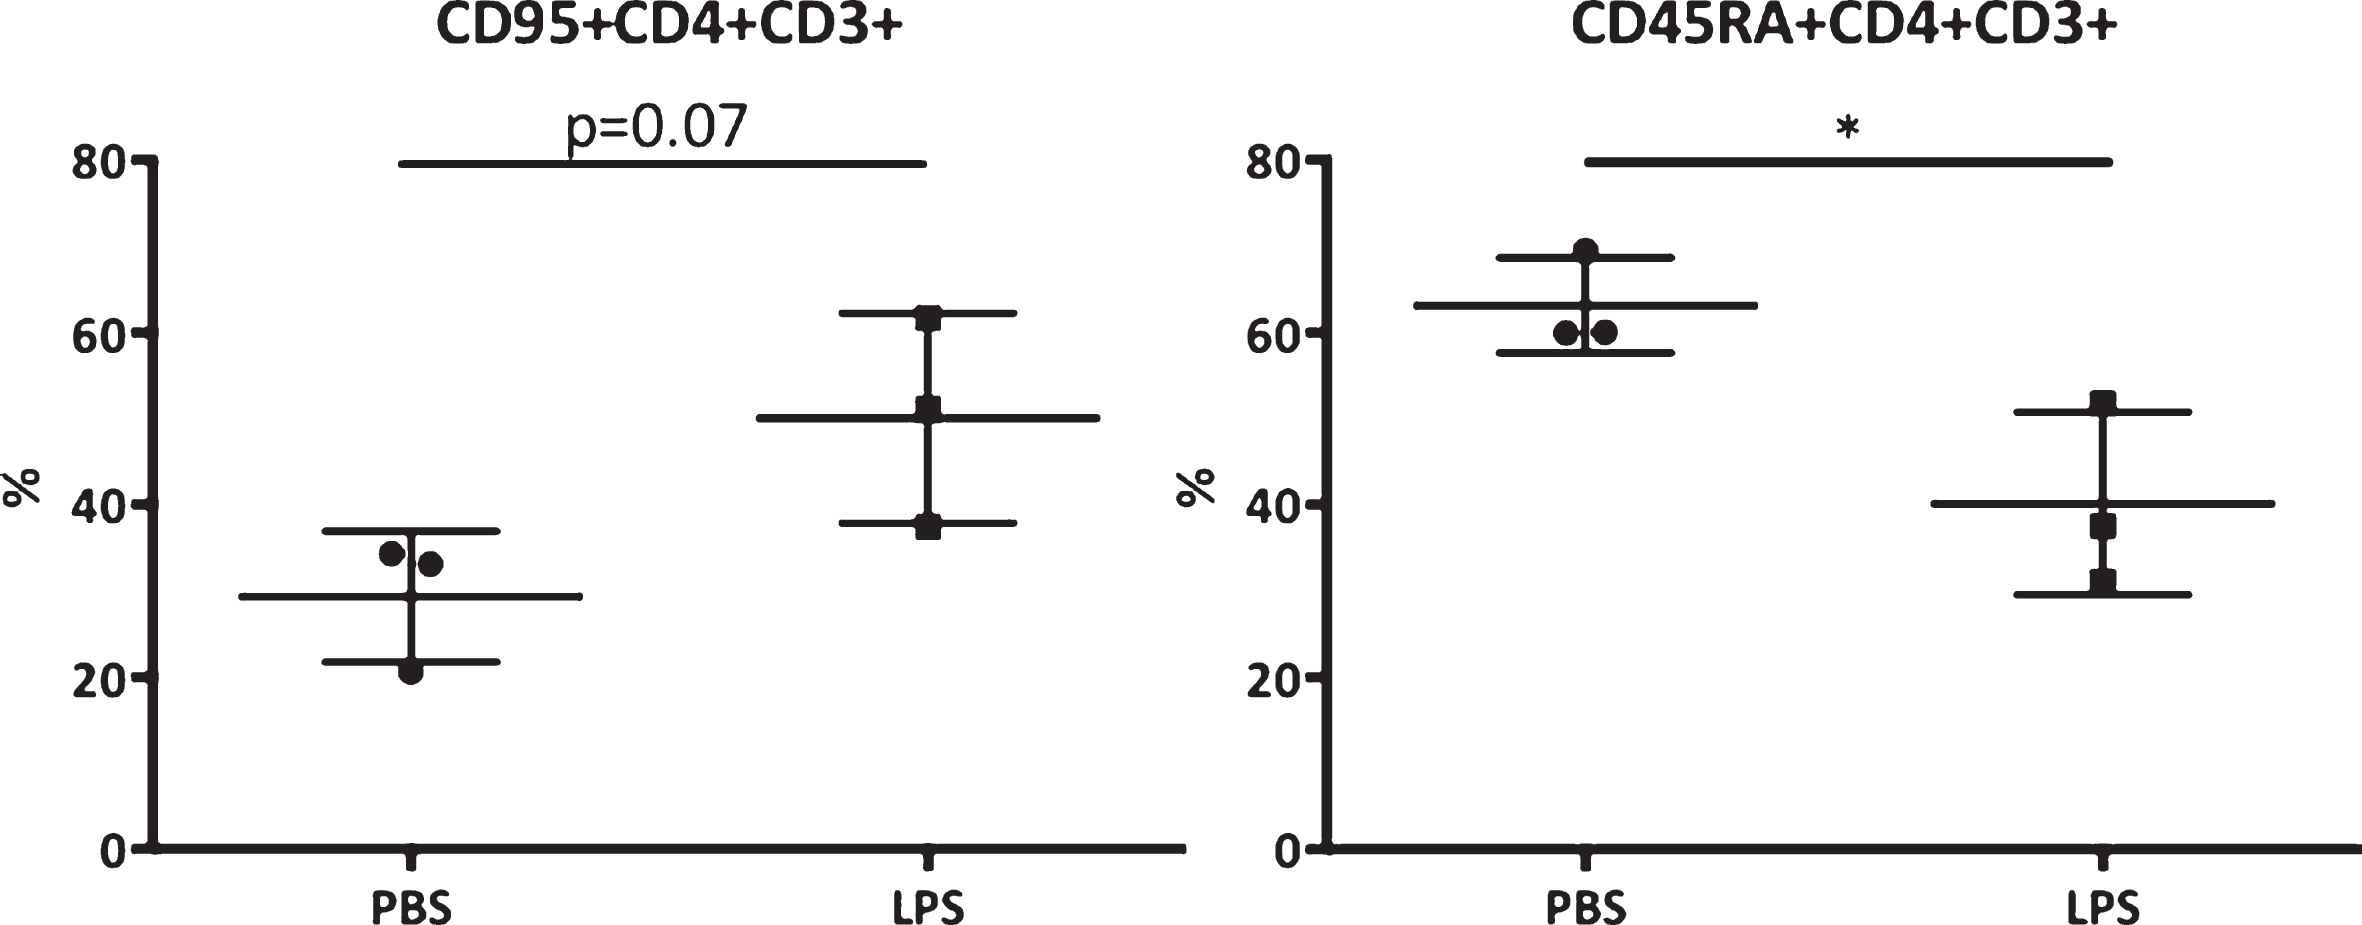 Blood biomarkers for AD. CD95 and CD45RA expression on CD3+CD4+ cells expressed in percentage of the CD3+CD4+ cells. Scores were compared between the LPS and PBS groups. *Significant differences, p < 0.05 (Mann-Whitney).